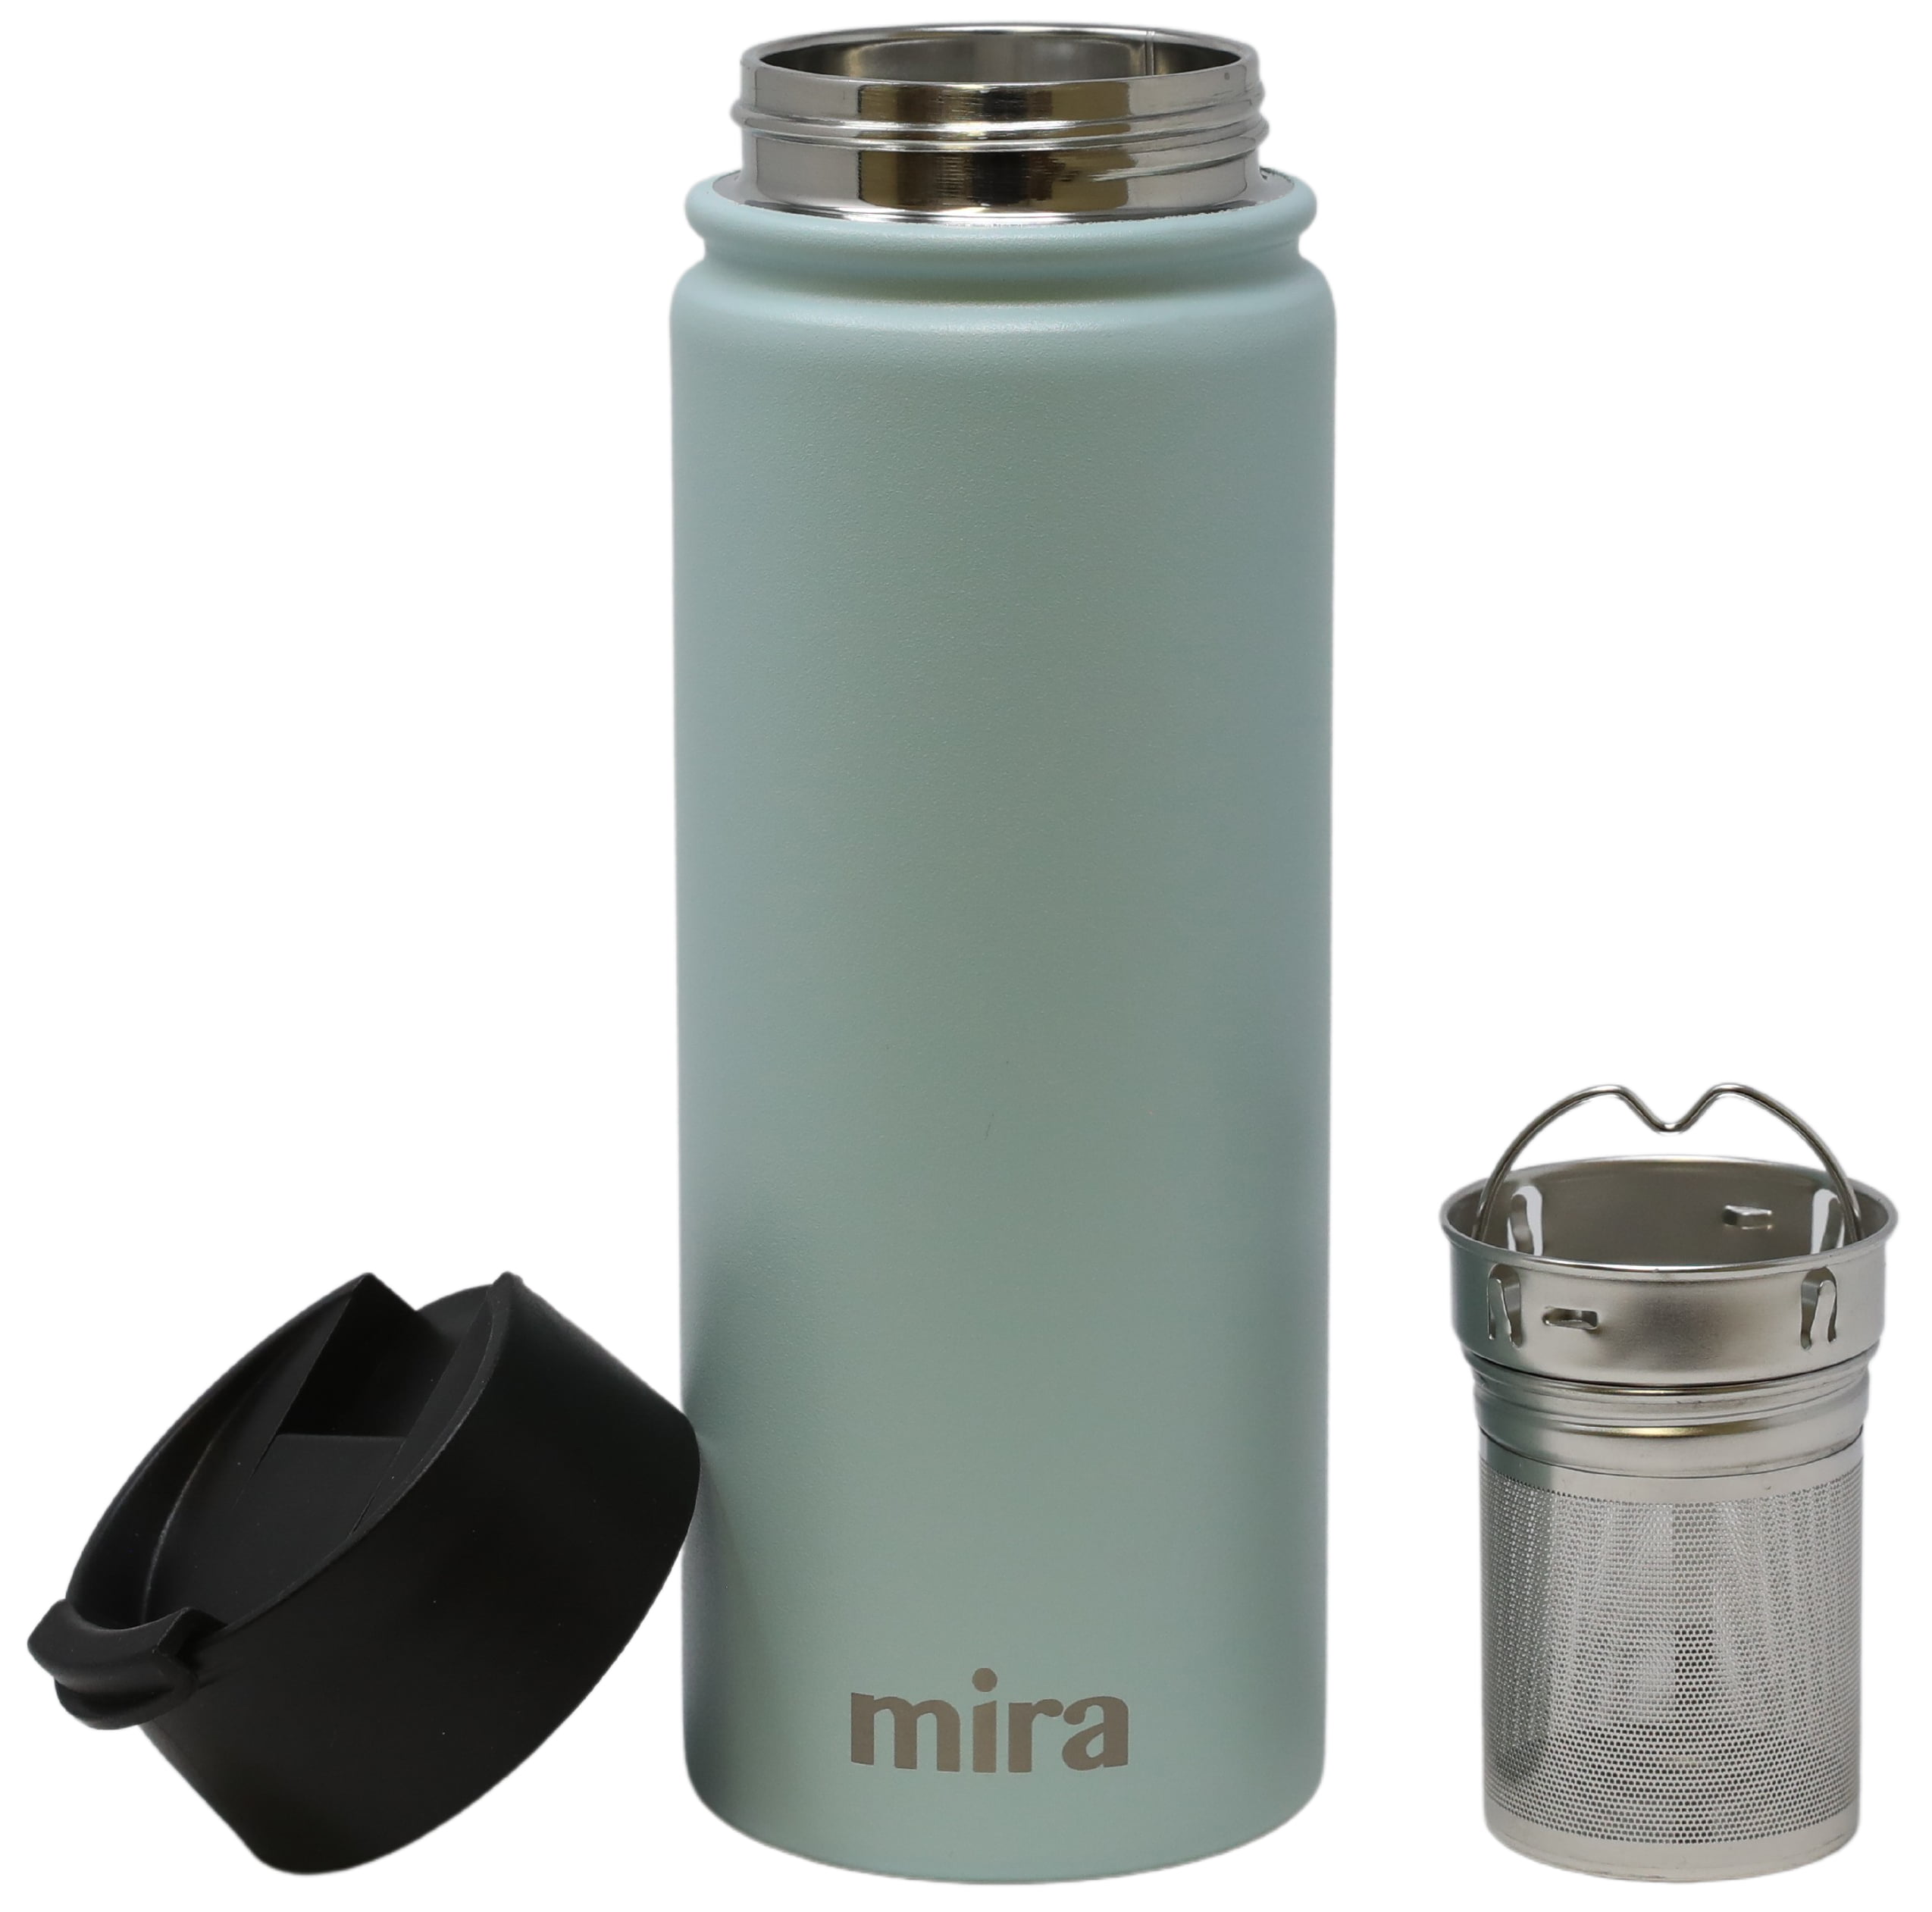 Mira 7 oz Insulated Small Thermos Flask